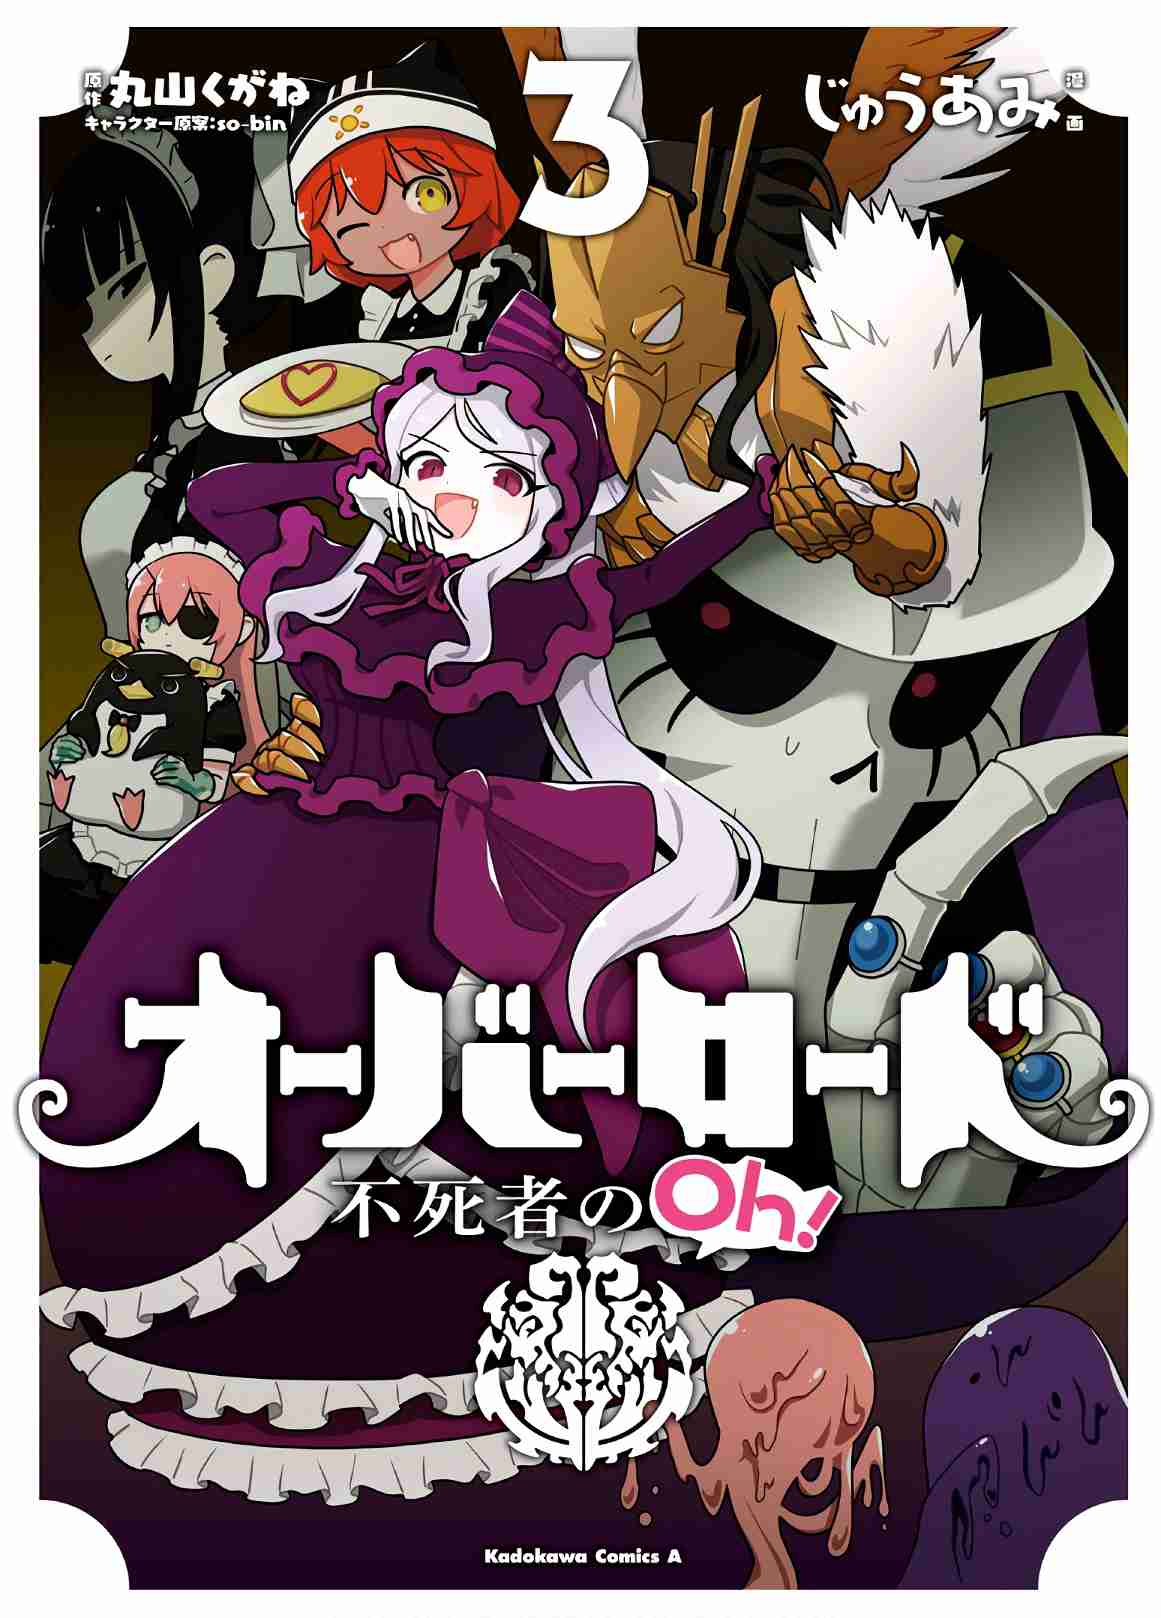 Overlord The Undead King Oh! Vol. 3 Ch. 13 Let’s design a good looking uniform!